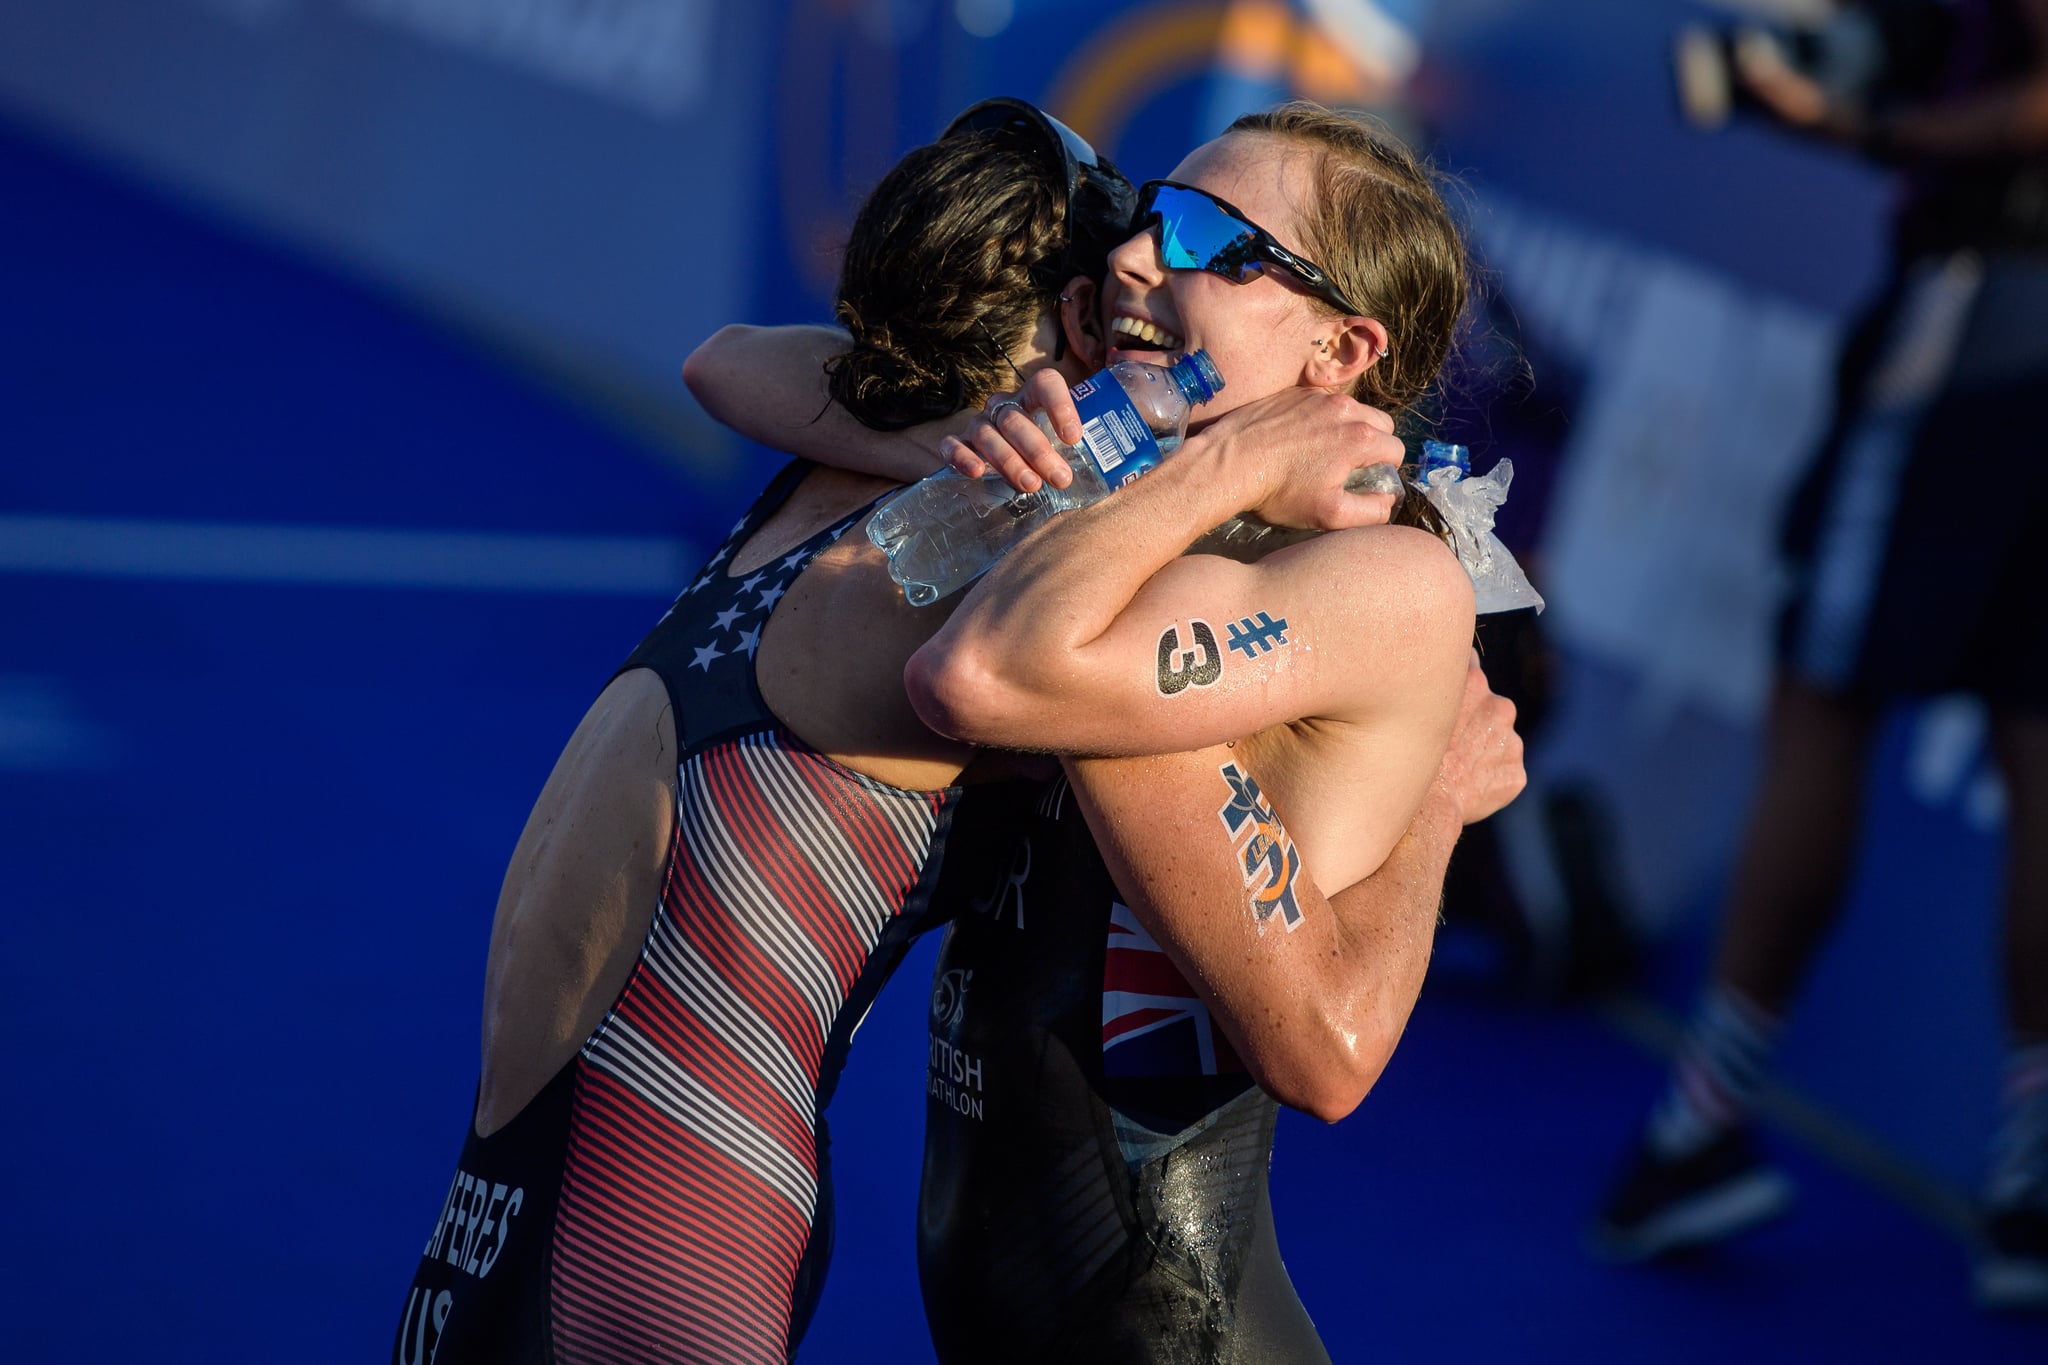 LAUSANNE, SWITZERLAND - AUGUST 31: Georgia Taylor-Brown of Great Britain gives Katie Zaferes of the United states a hug after the women's elite olympic race at the ITU World Triathlon Grand Final on August 31, 2019 in Lausanne, Switzerland. (Photo by Jörg Schüler/Getty Images)